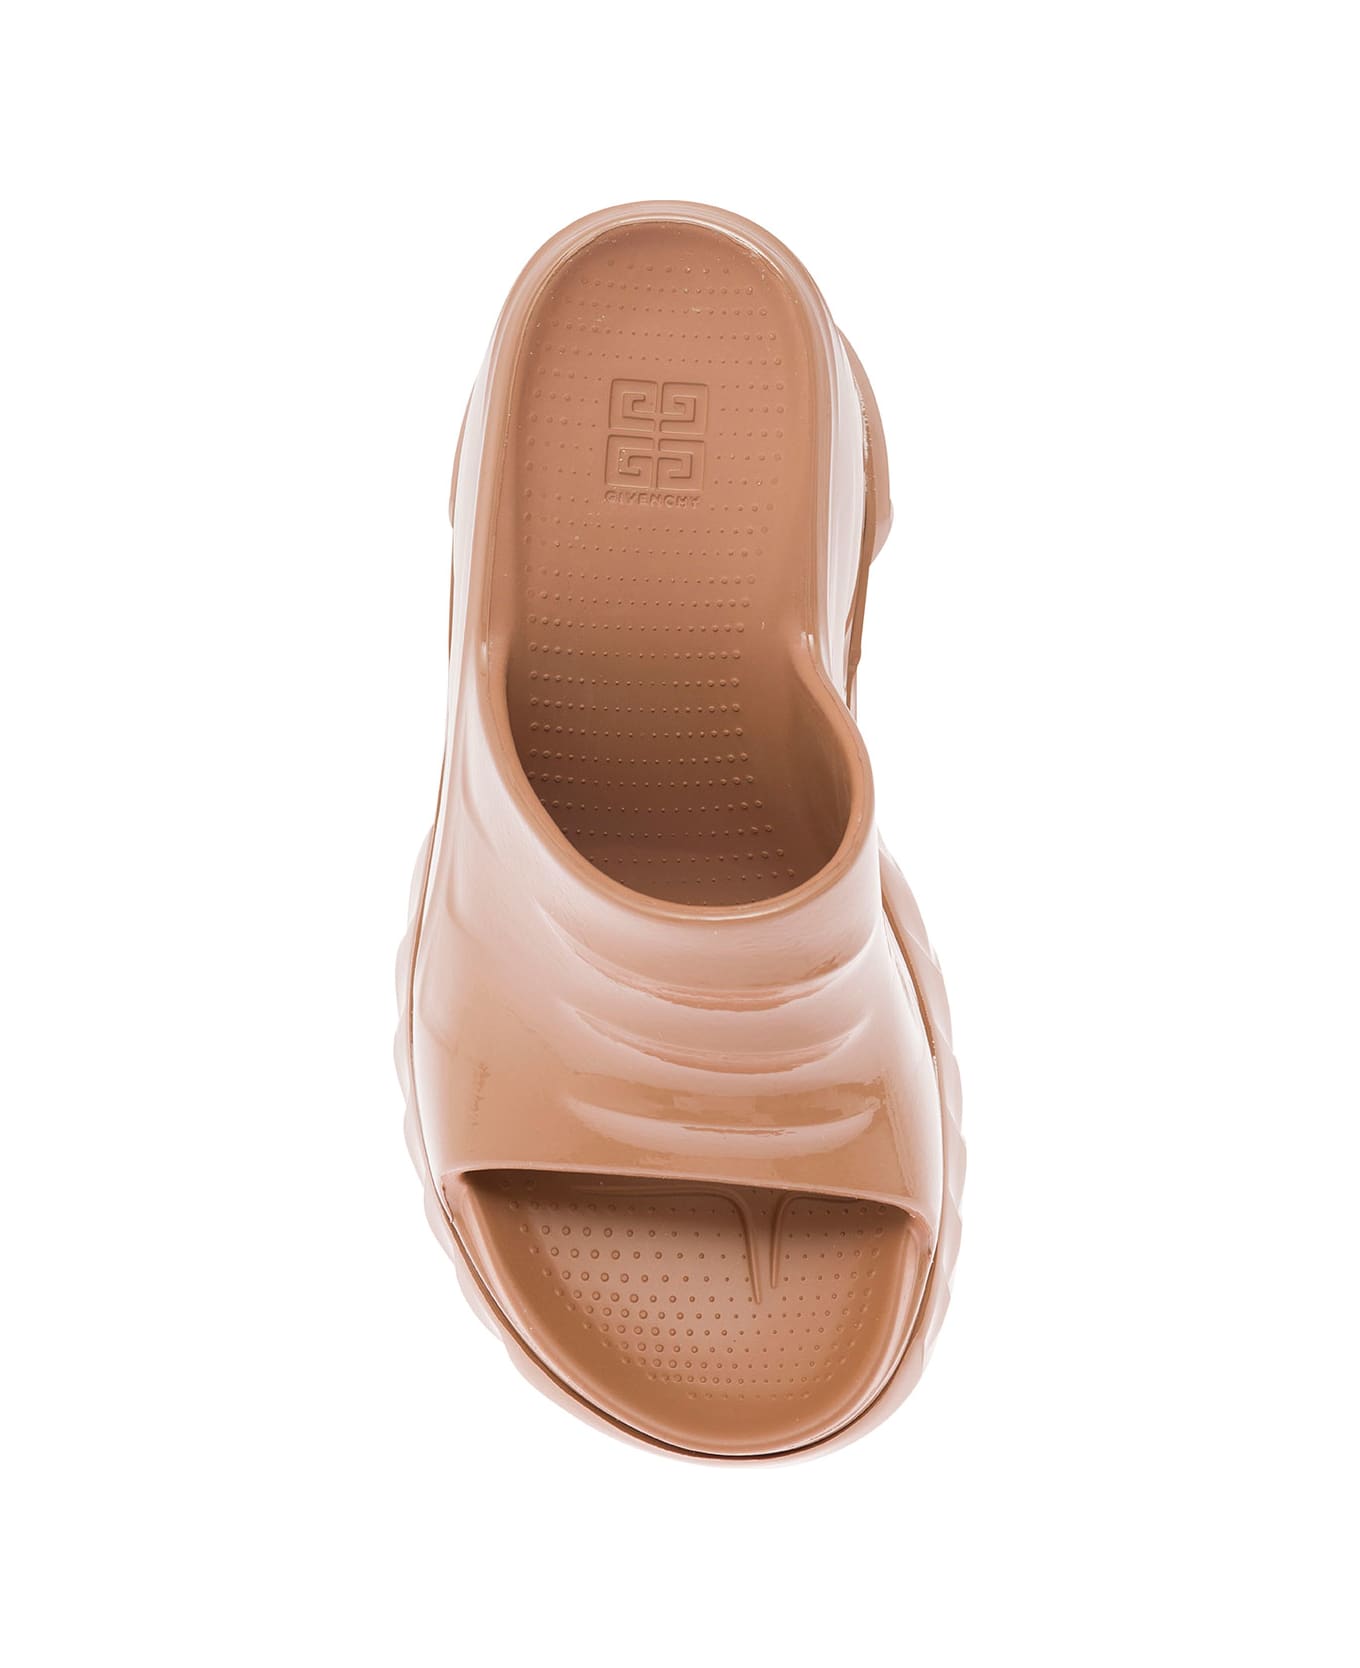 Givenchy Marshmallow Mules - Beige